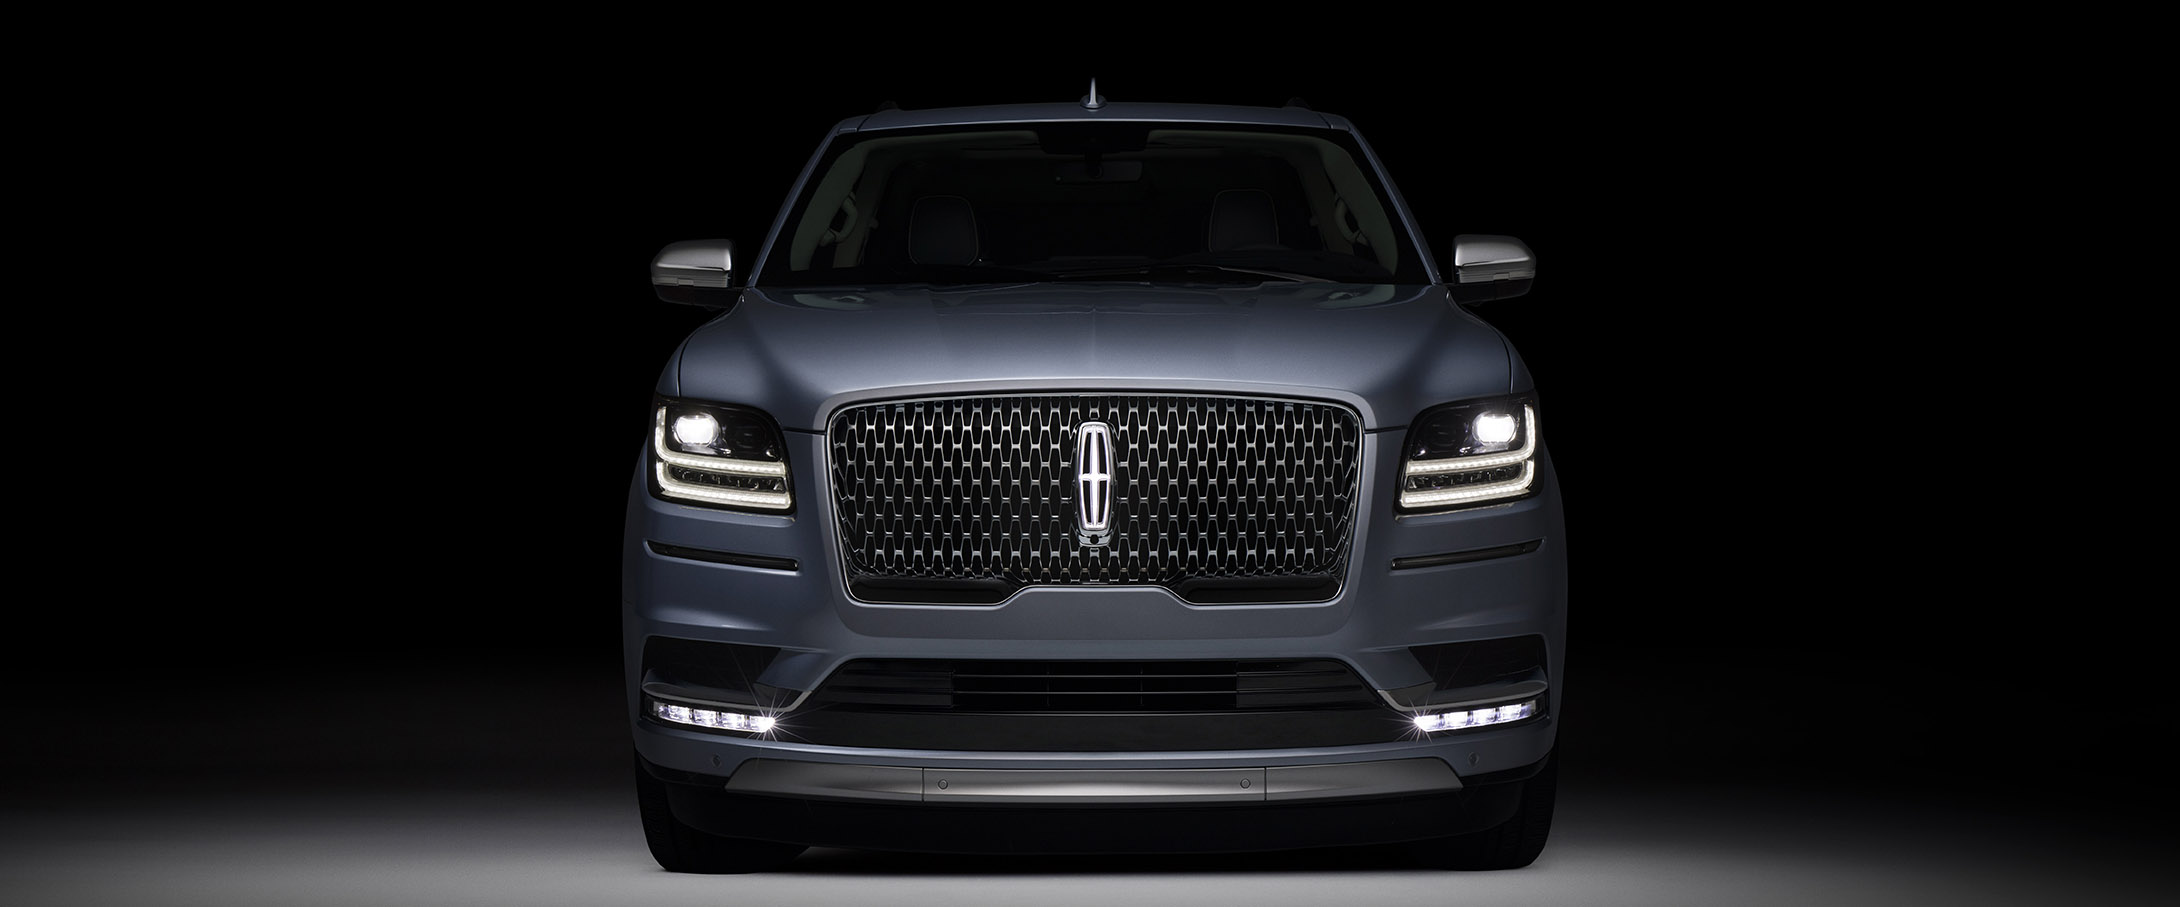 First Look: The 2018 Lincoln Navigator Is Bigger, Bolder, and Better than ever.